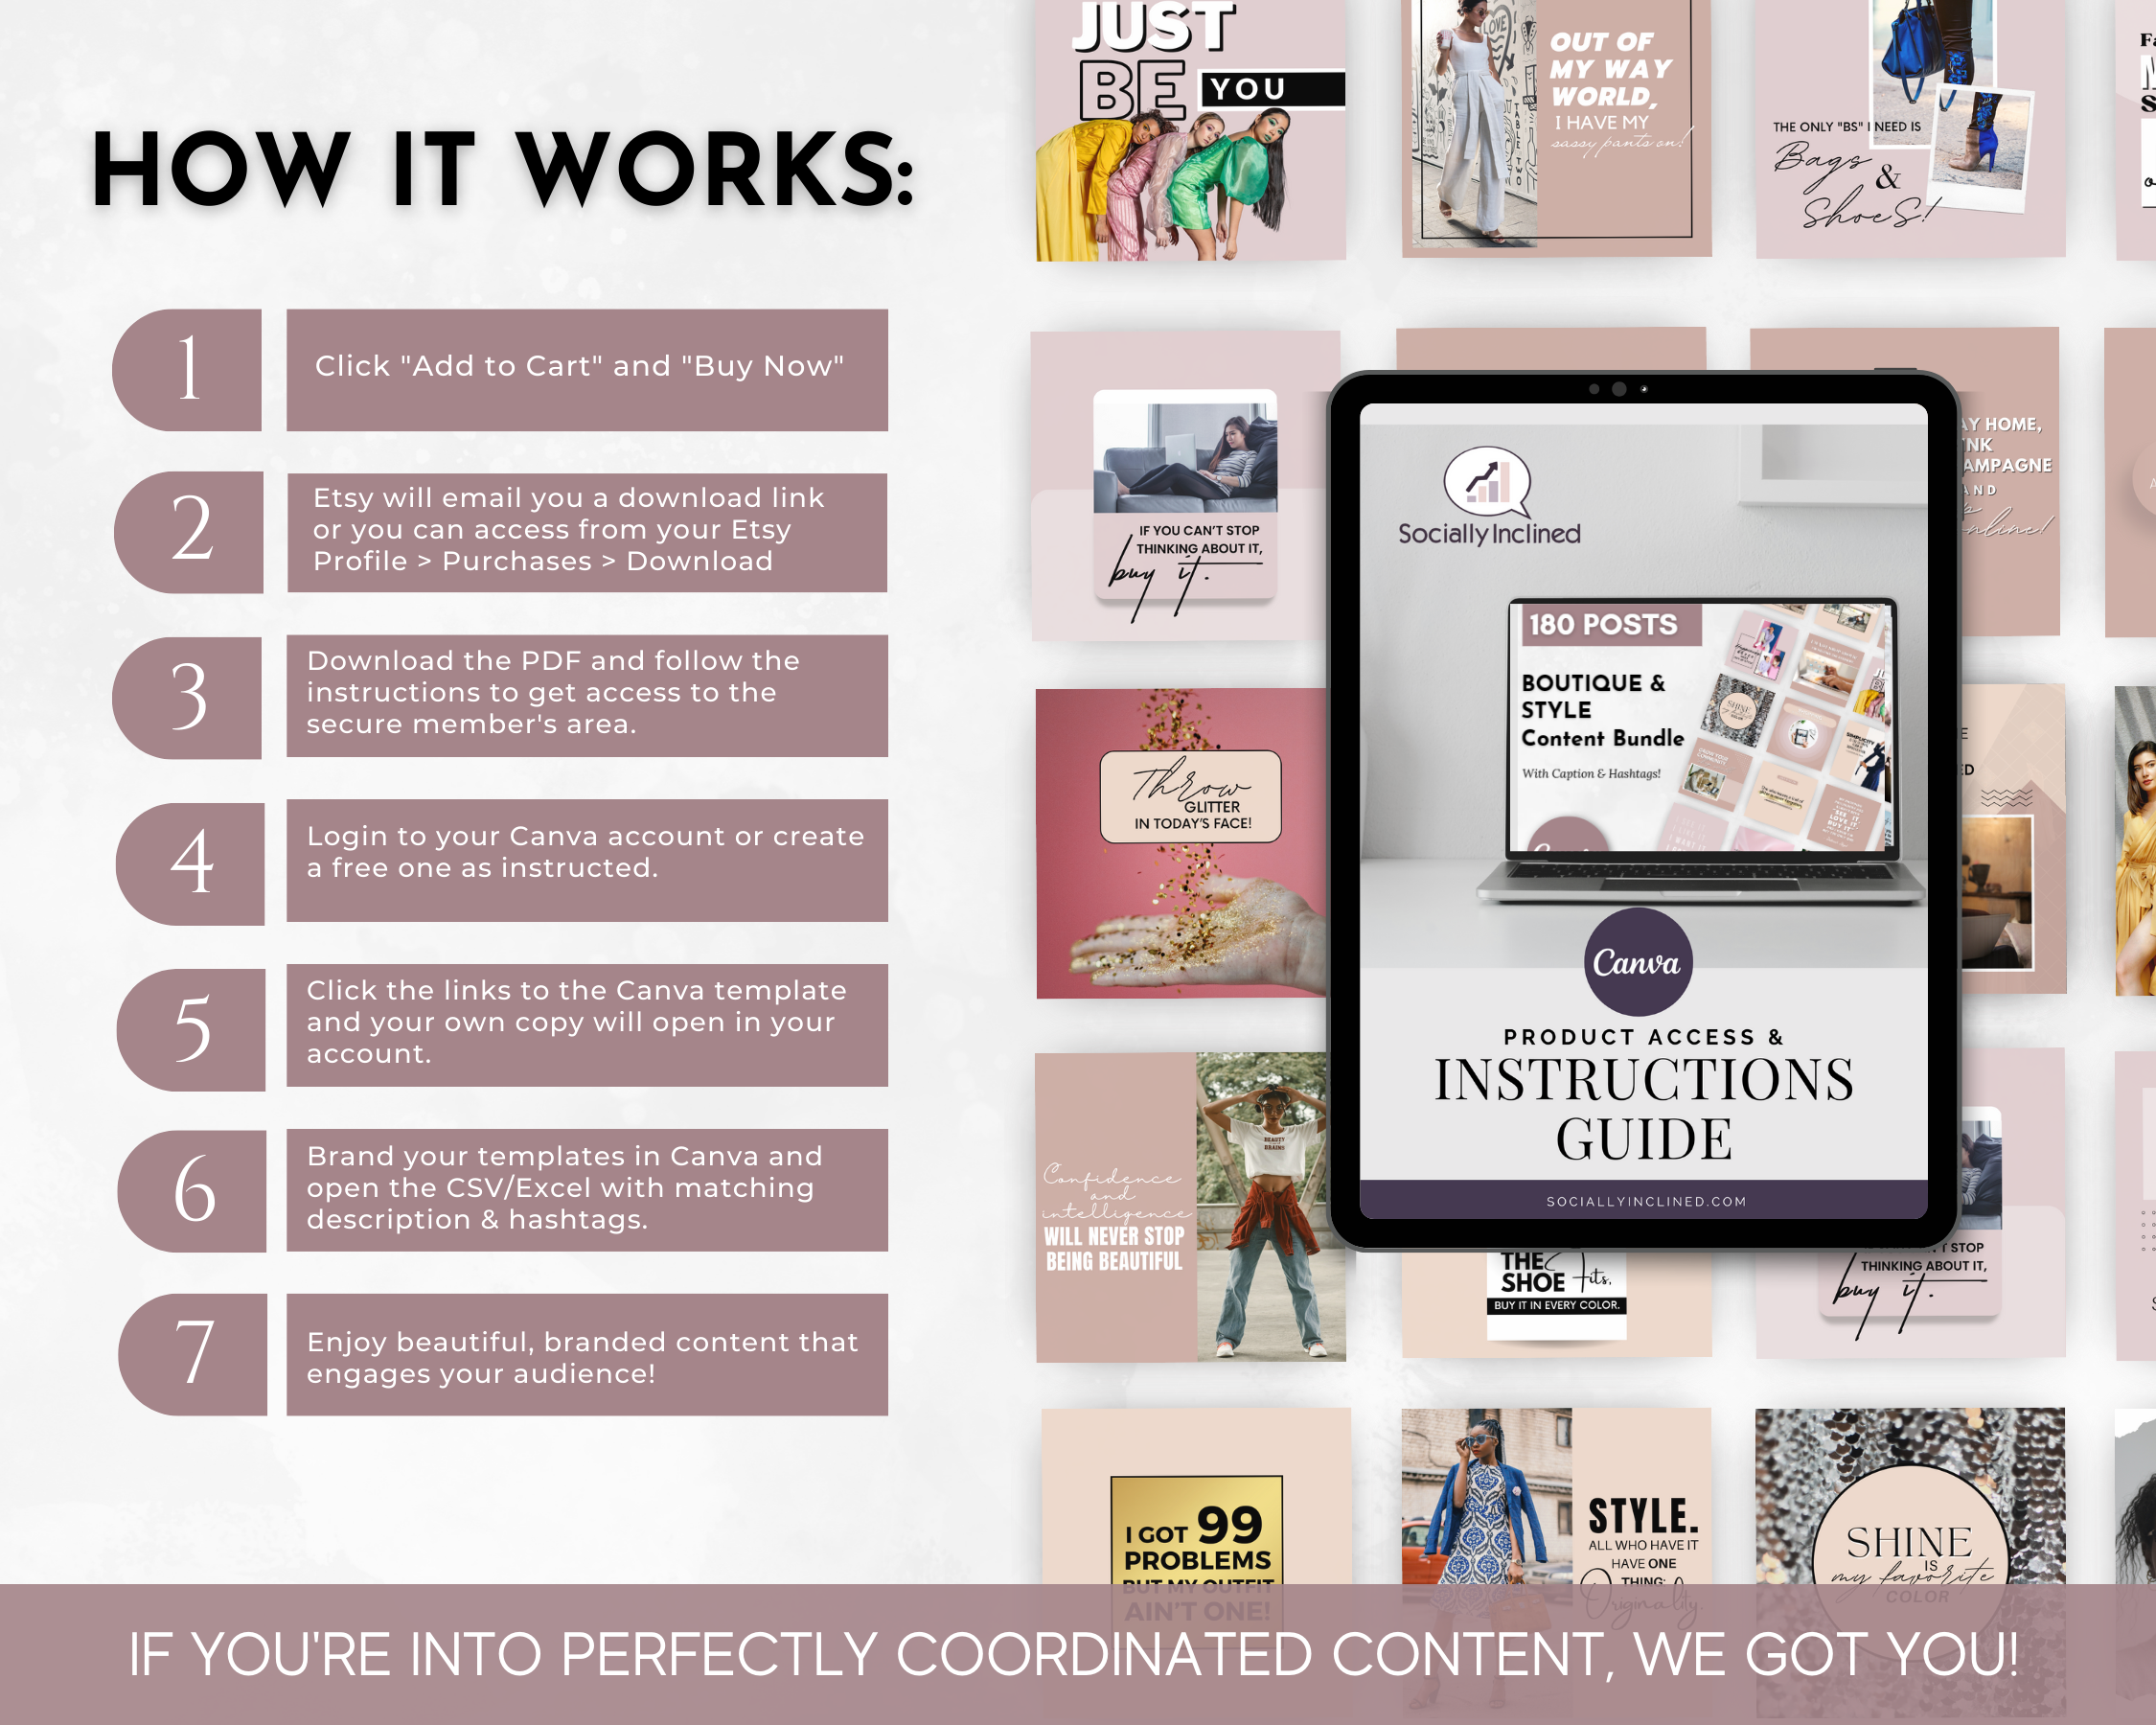 How to Use Hashtags and Keywords in Social Media Images - A Ready-To-Post Instruction Guide for the Boutique & Style Store Social Media Post Bundle with Canva Templates by Socially Inclined.